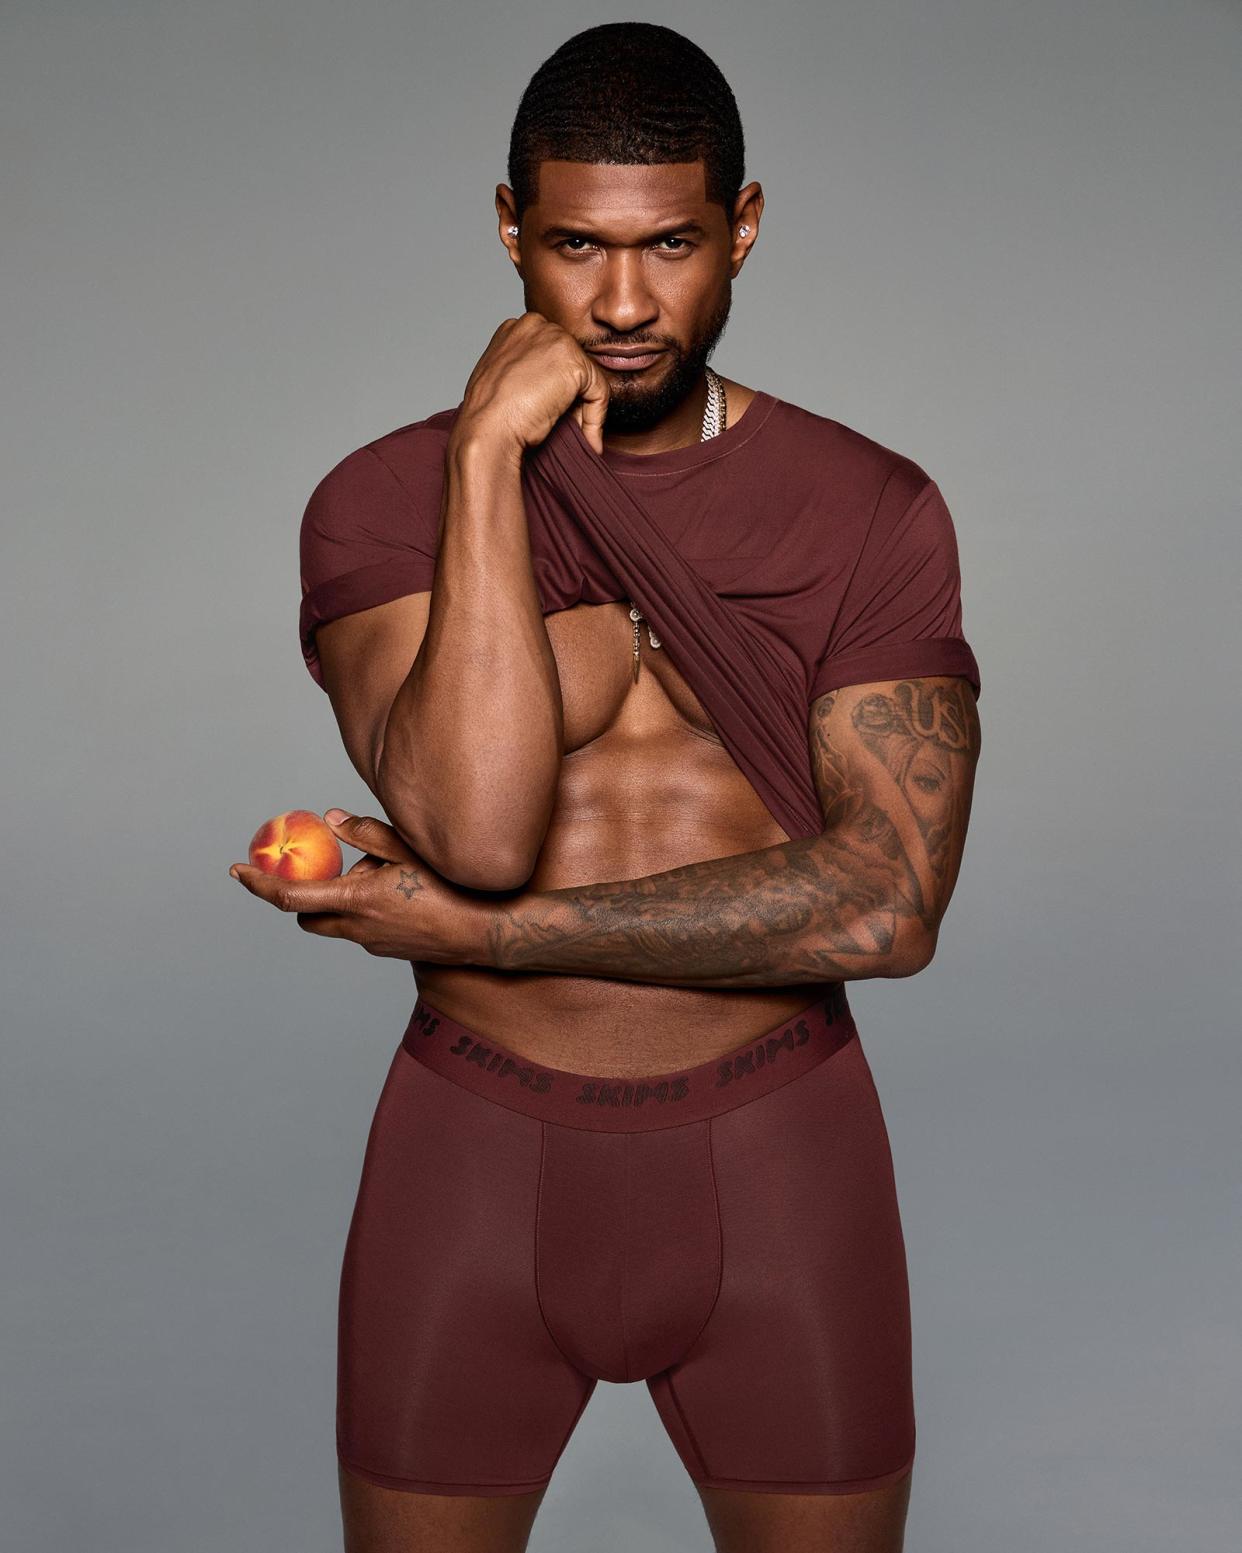 Usher Models Skims Underwear in New Mens Campaign and Announces Limited Edition Album Release